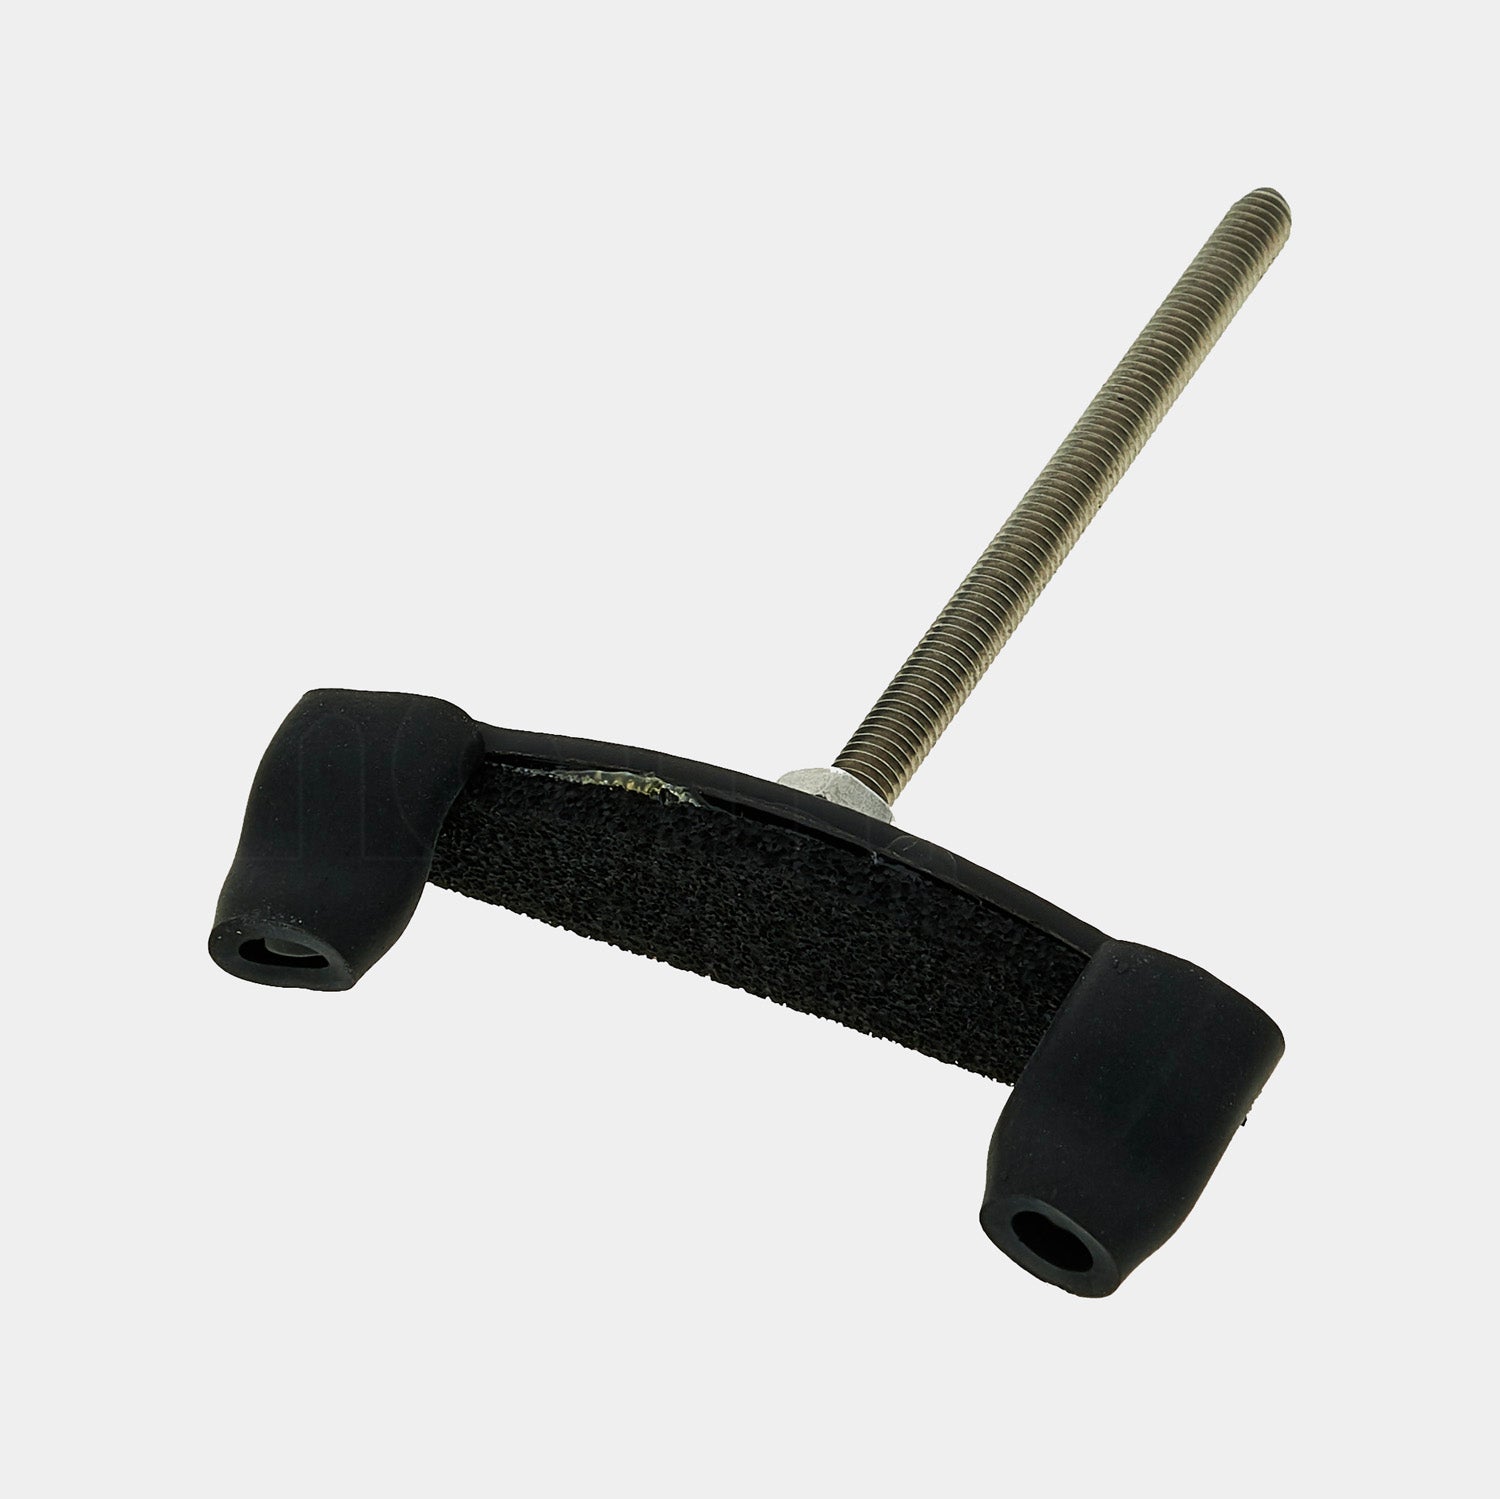 Retaining Claw for Shoulder Rests